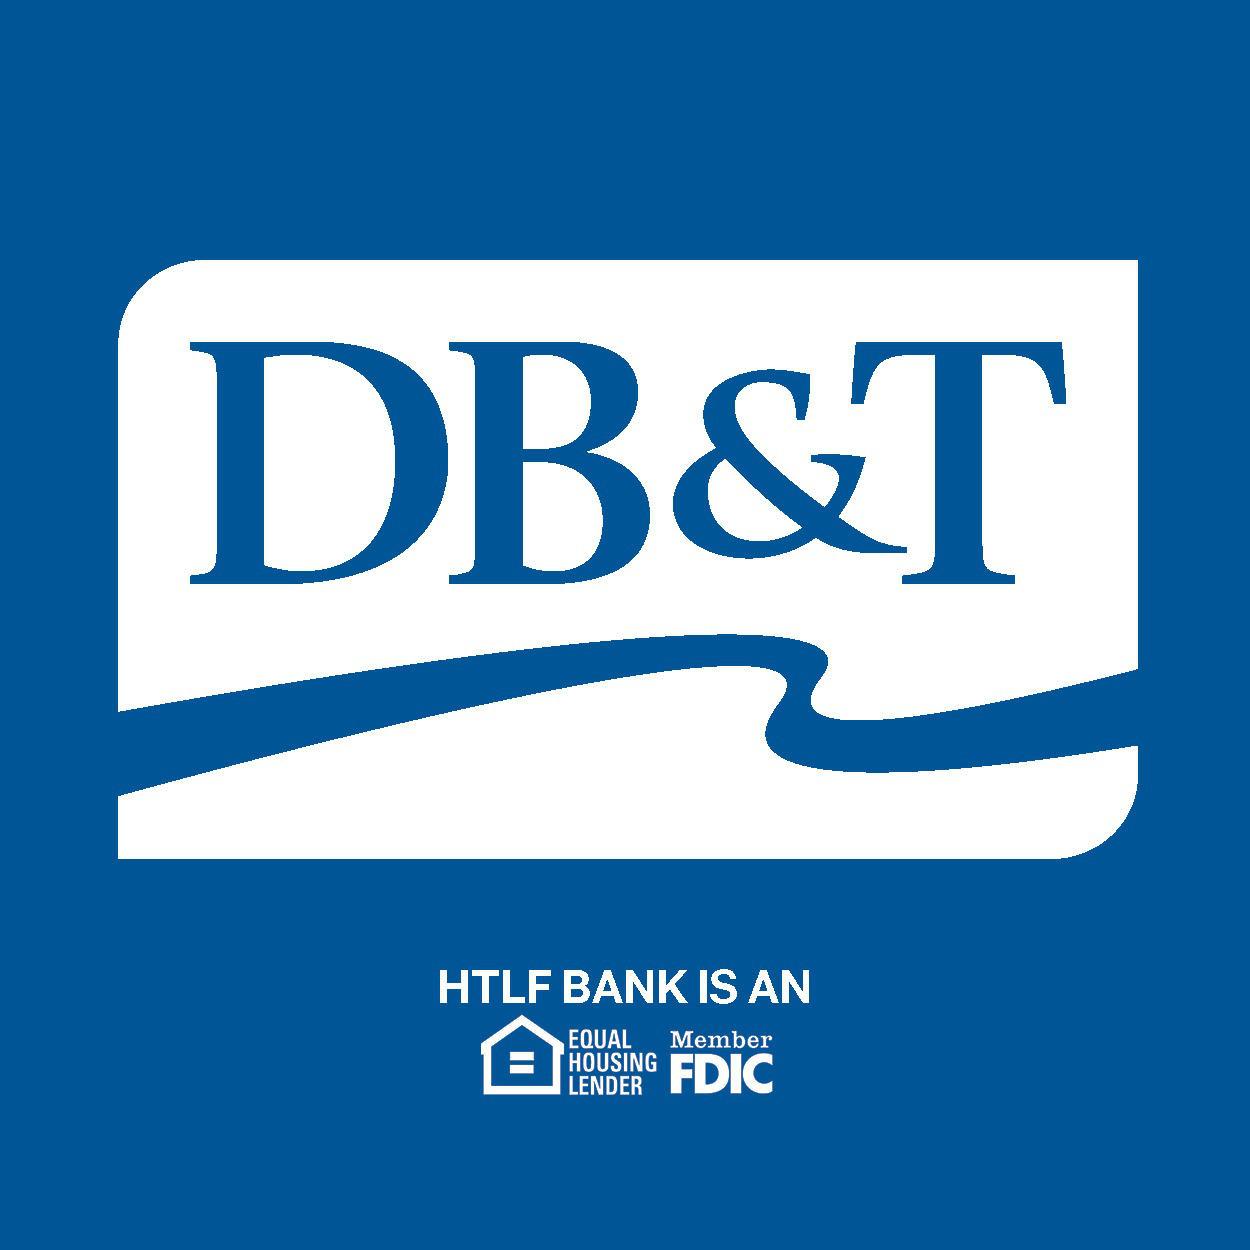 Dubuque Bank & Trust, a division of HTLF Bank